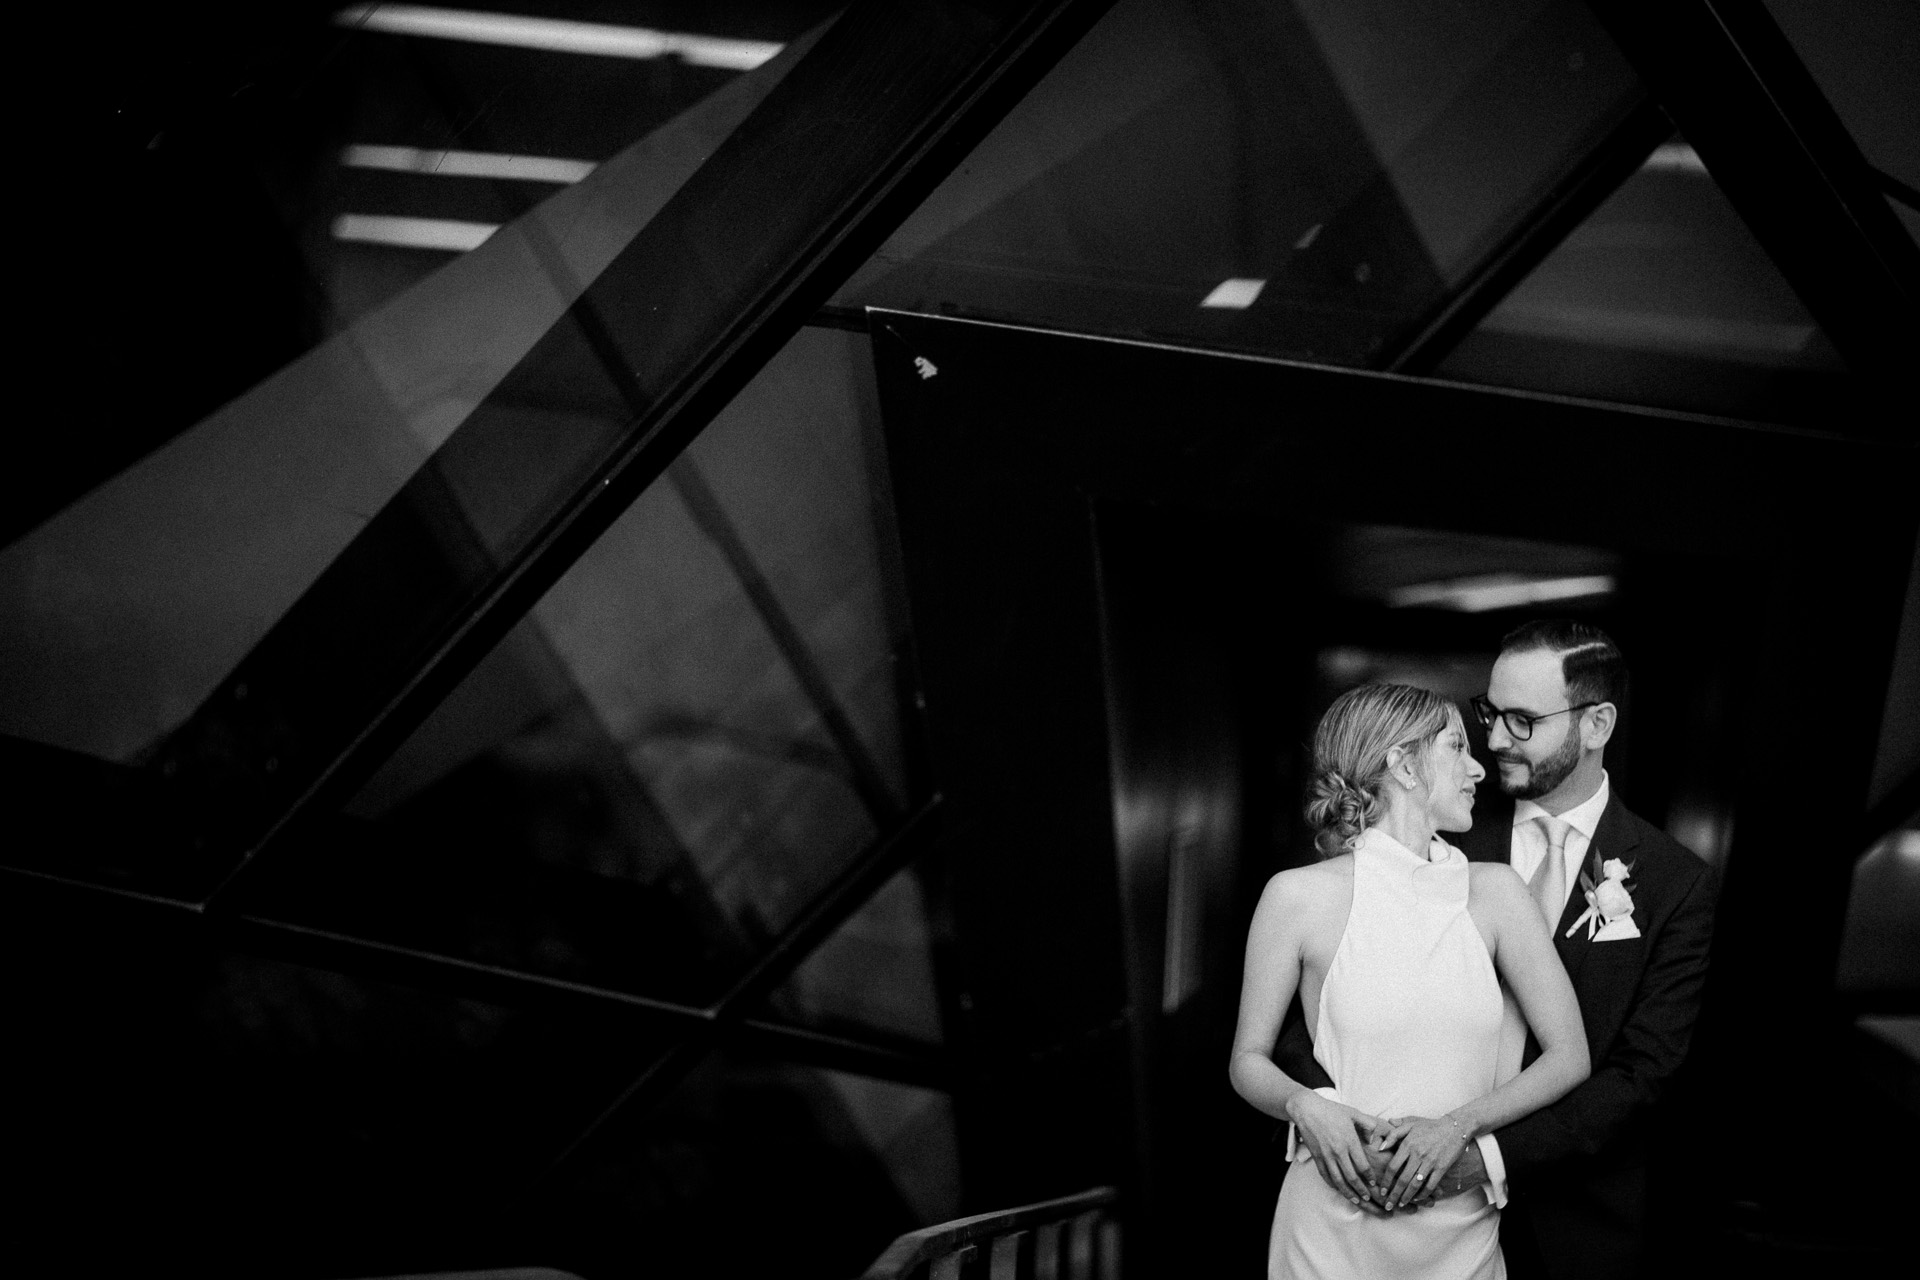 Toronto Yorkville Wedding Pictures by Avangard Photography